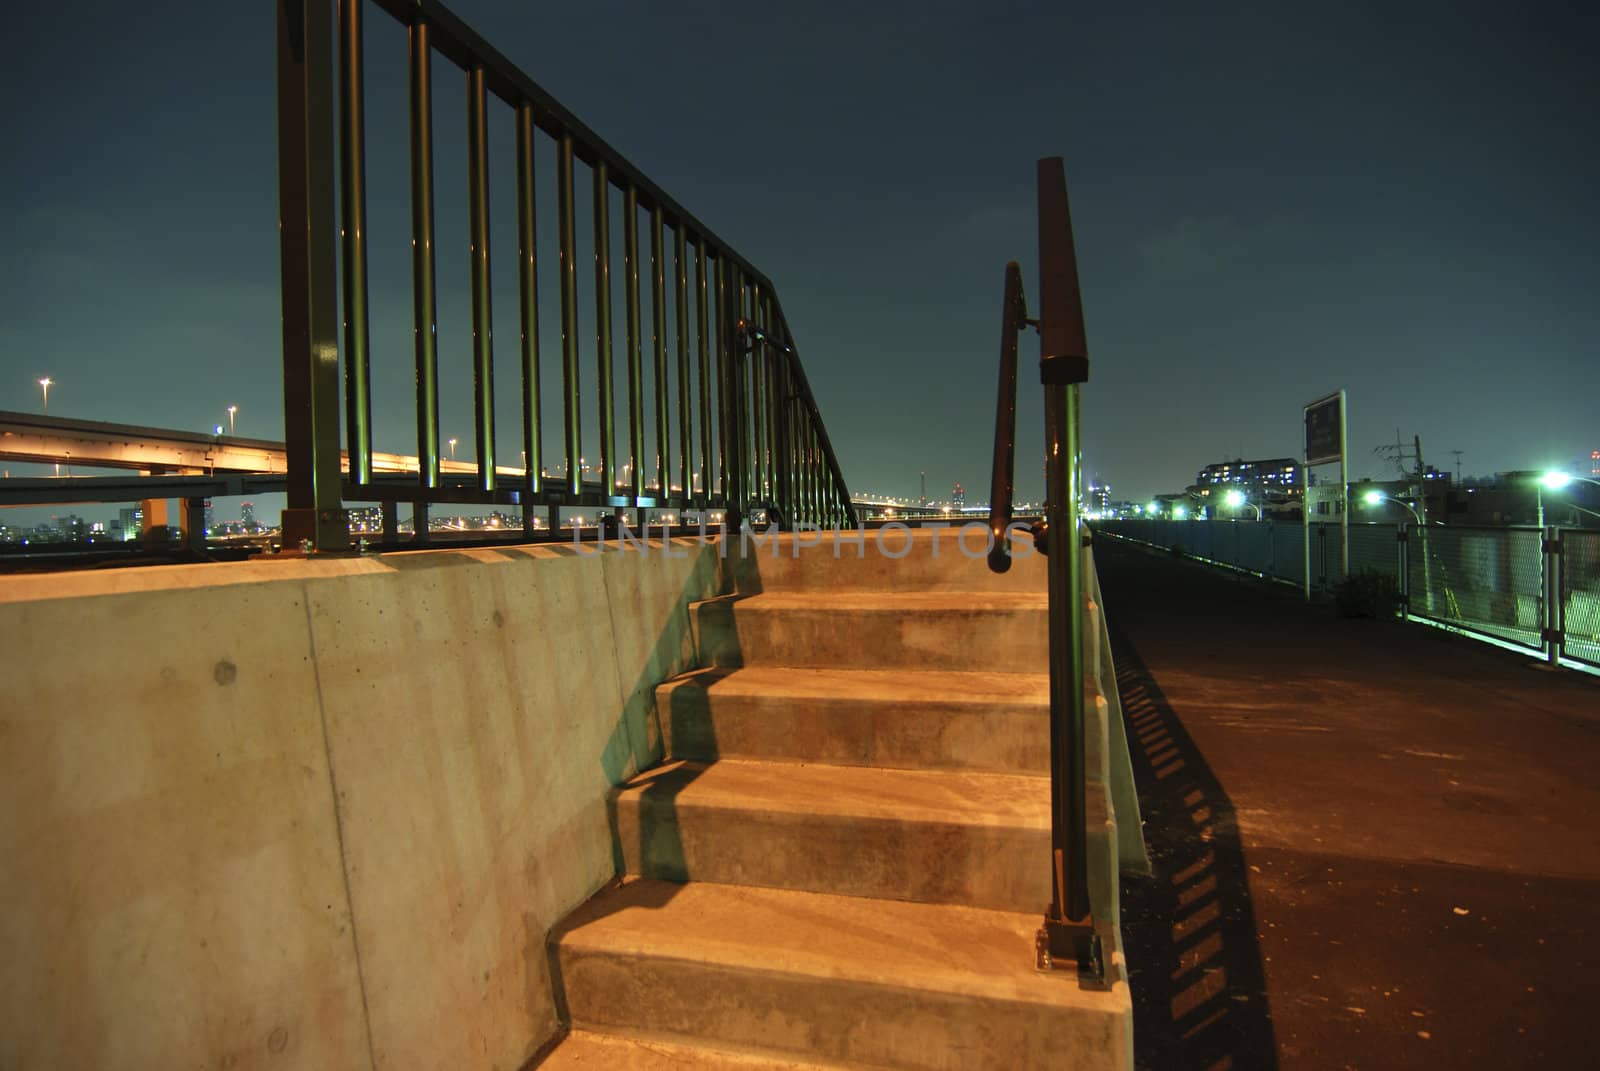 outdoor night stairs with metallic handrails over dark blue sky background